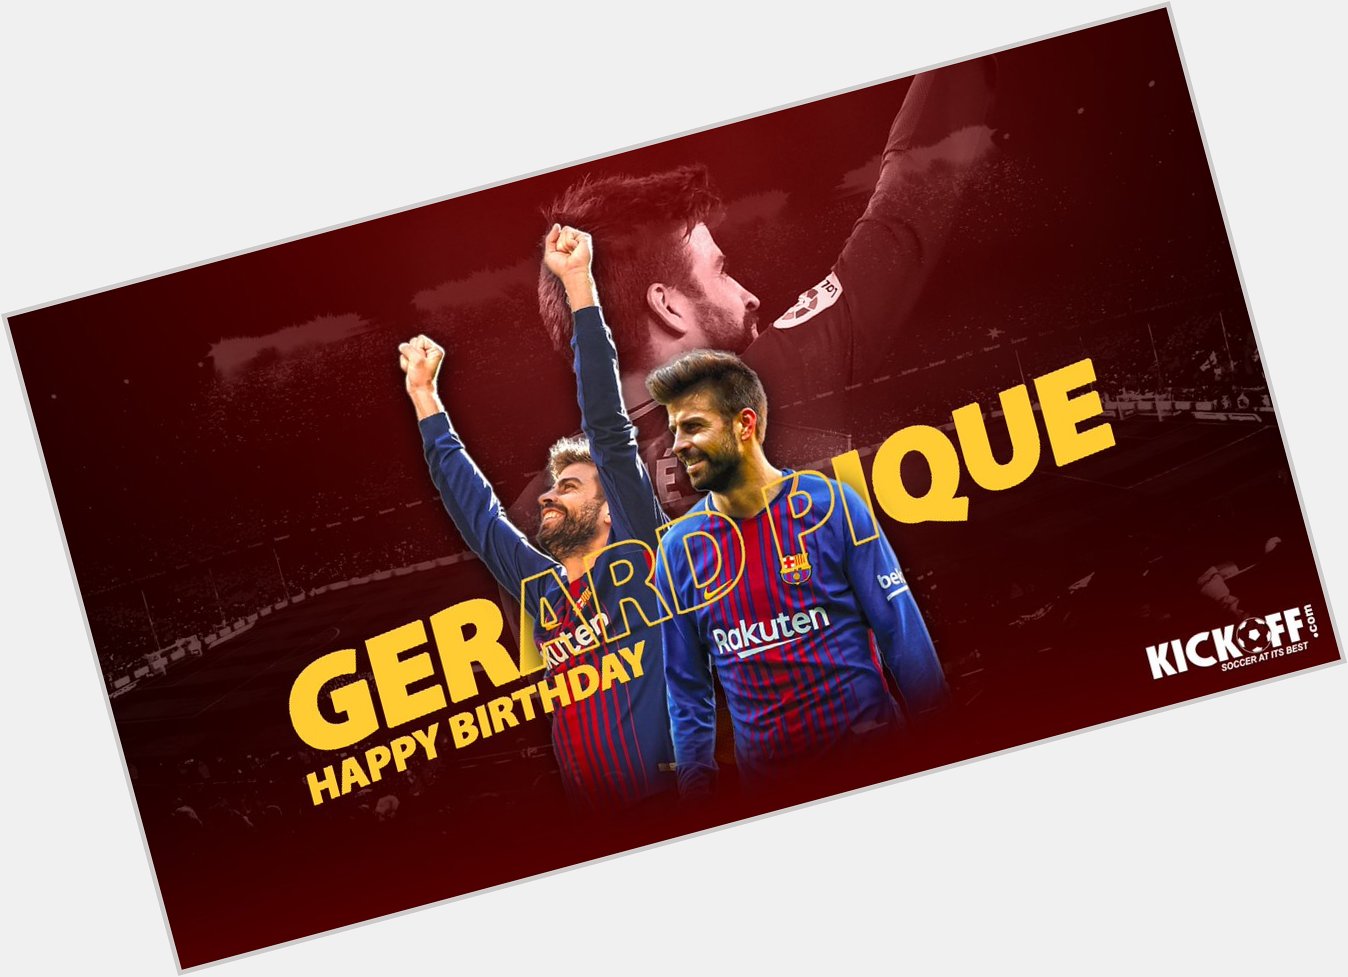 Barcelona s centre-back Gerard Pique turns 31 today. Join in wishing him a Happy Birthday! 